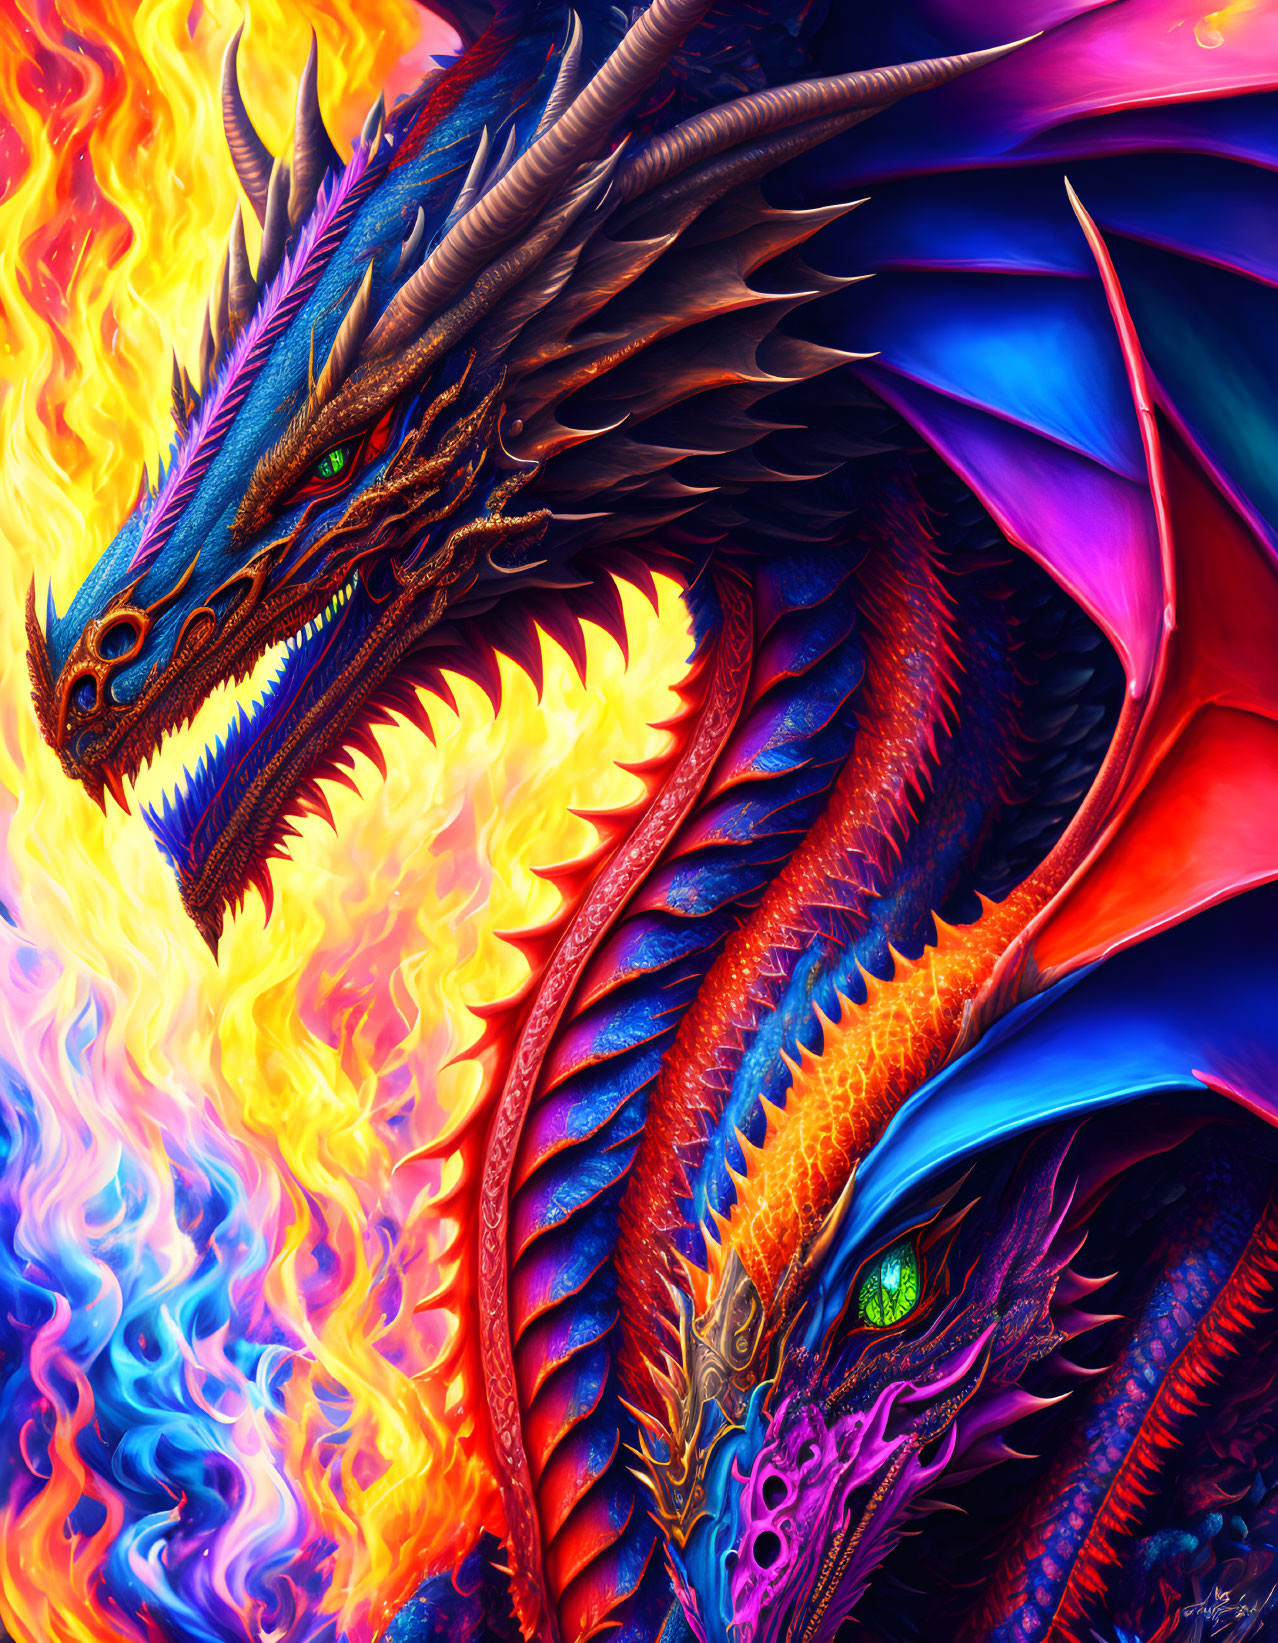 Colorful Artwork: Two Dragons Contrasting Fire and Ice